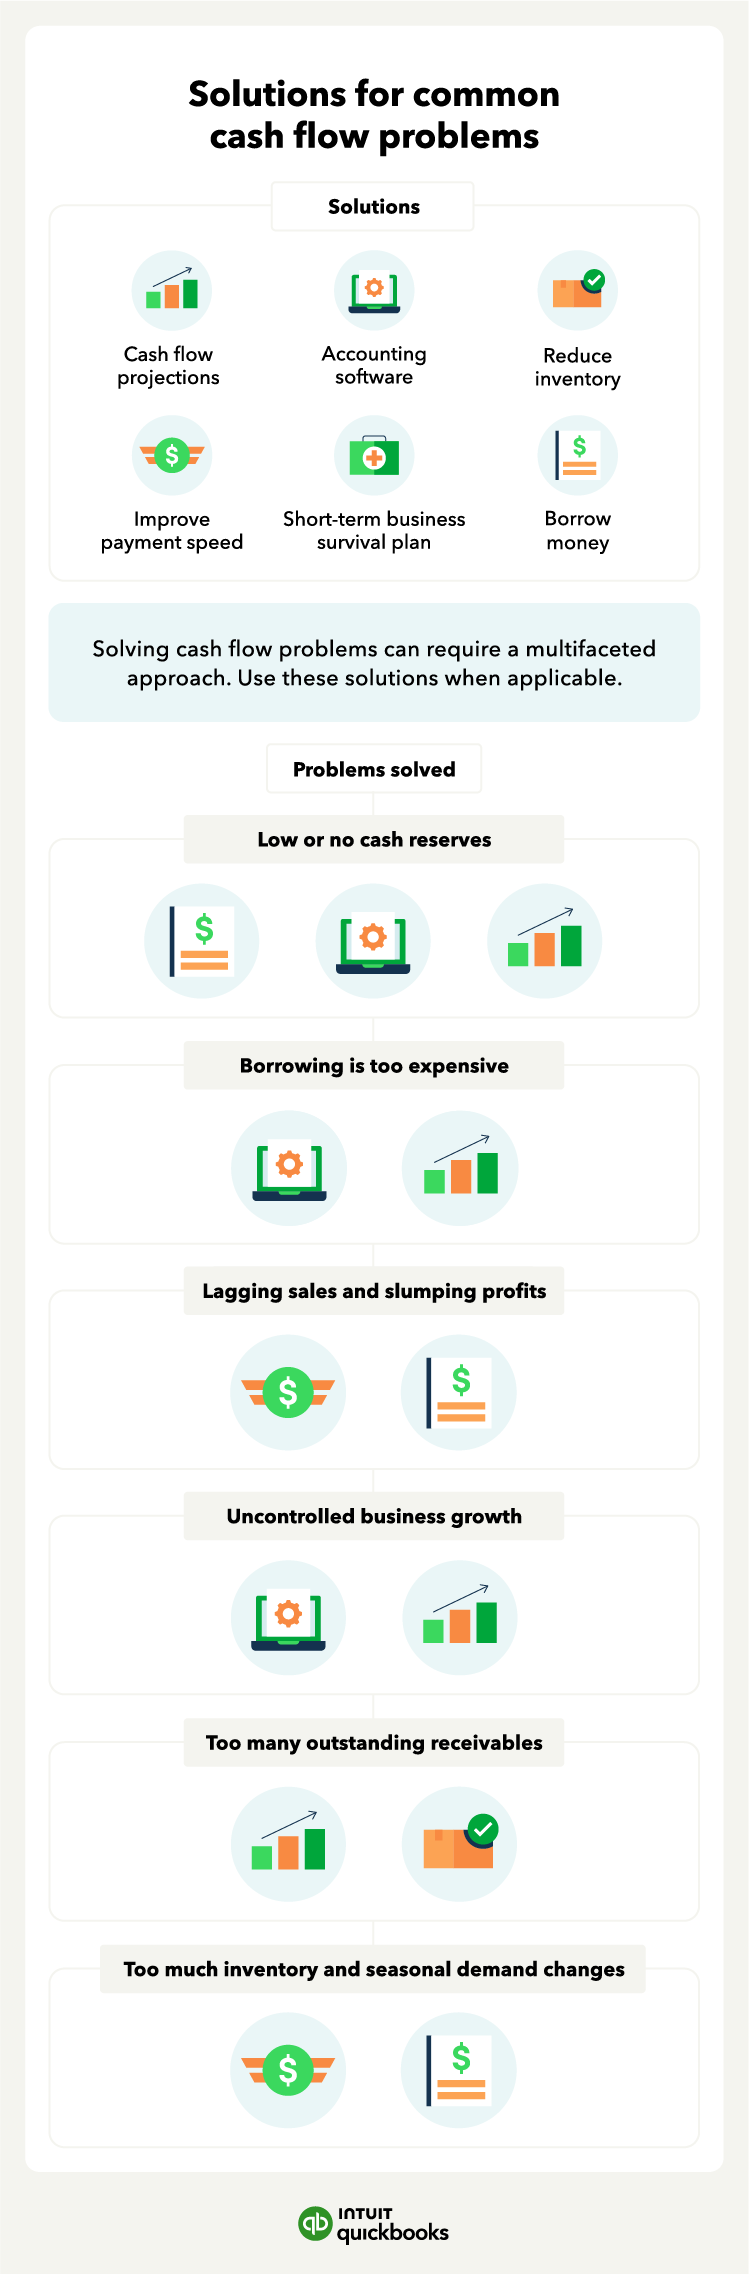 infographic featuring cash flow problems a business may face, including low cash reserves, expensive borrowing, and too many outstanding receivables with icons for solutions like borrowing money, using cash flow projections, and using accounting software.